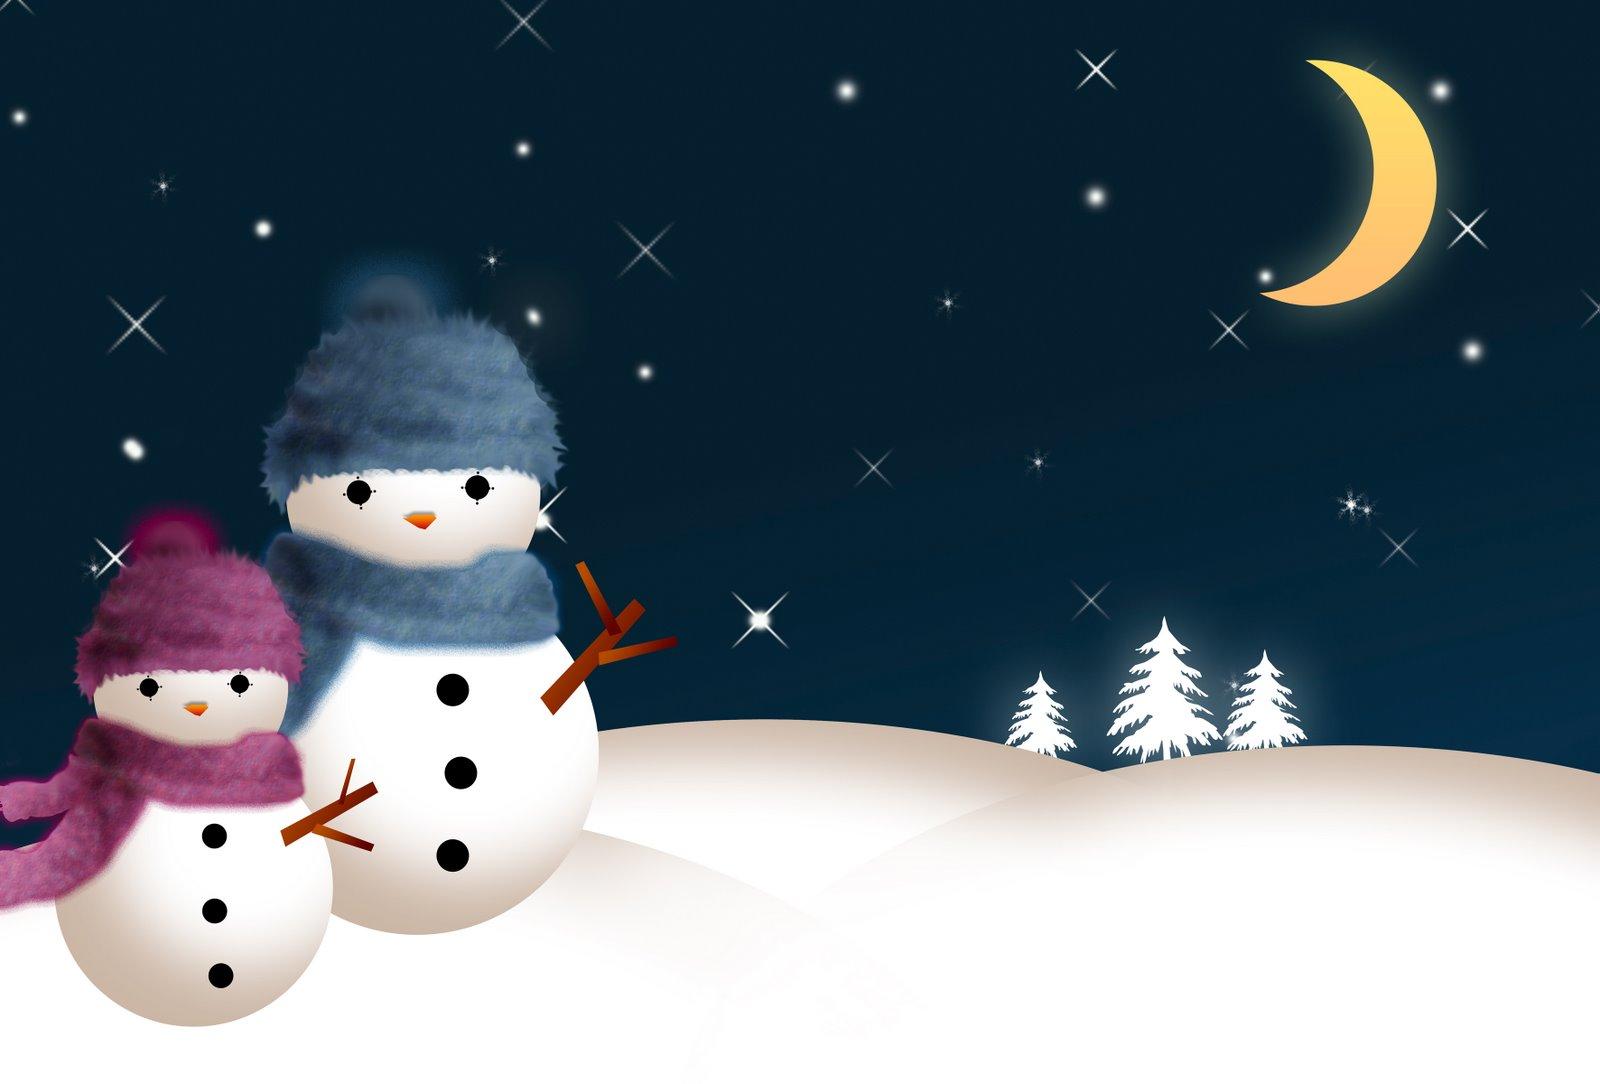 Snowman Hallo Christmas Wallpaper Best With